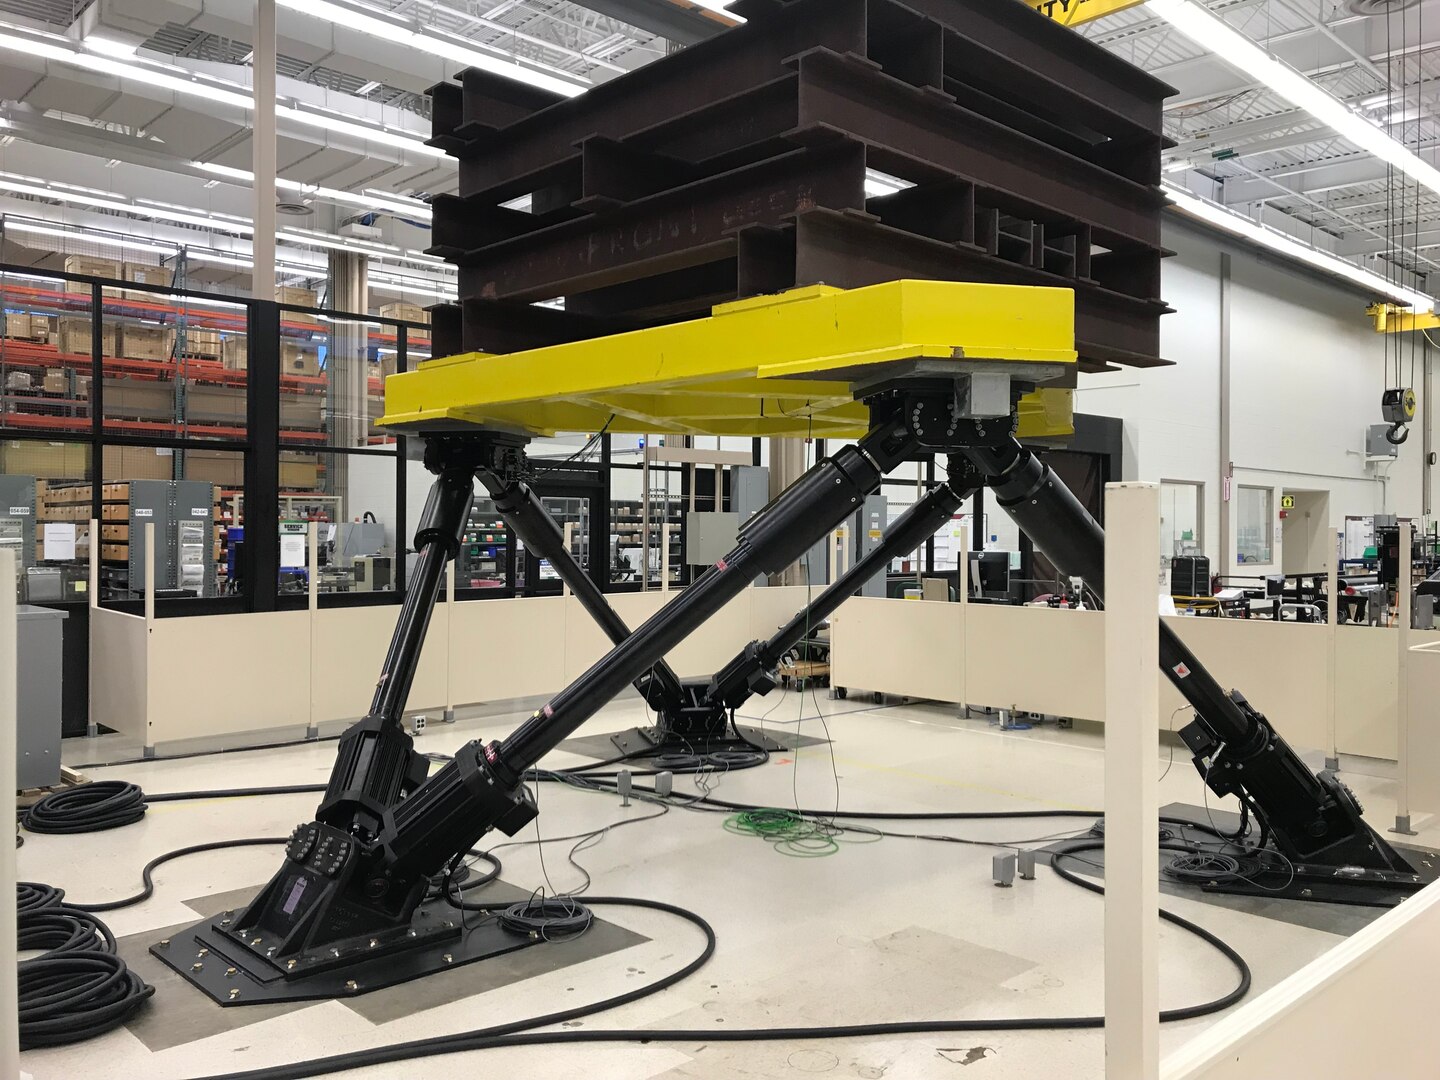 IMAGE: Commercial motion base typically used for flight simulators and theme park rides. Engineers at NSWCDD adapted the base to simulate ship movement environments for use in testing durability and function of weapons capabilities.